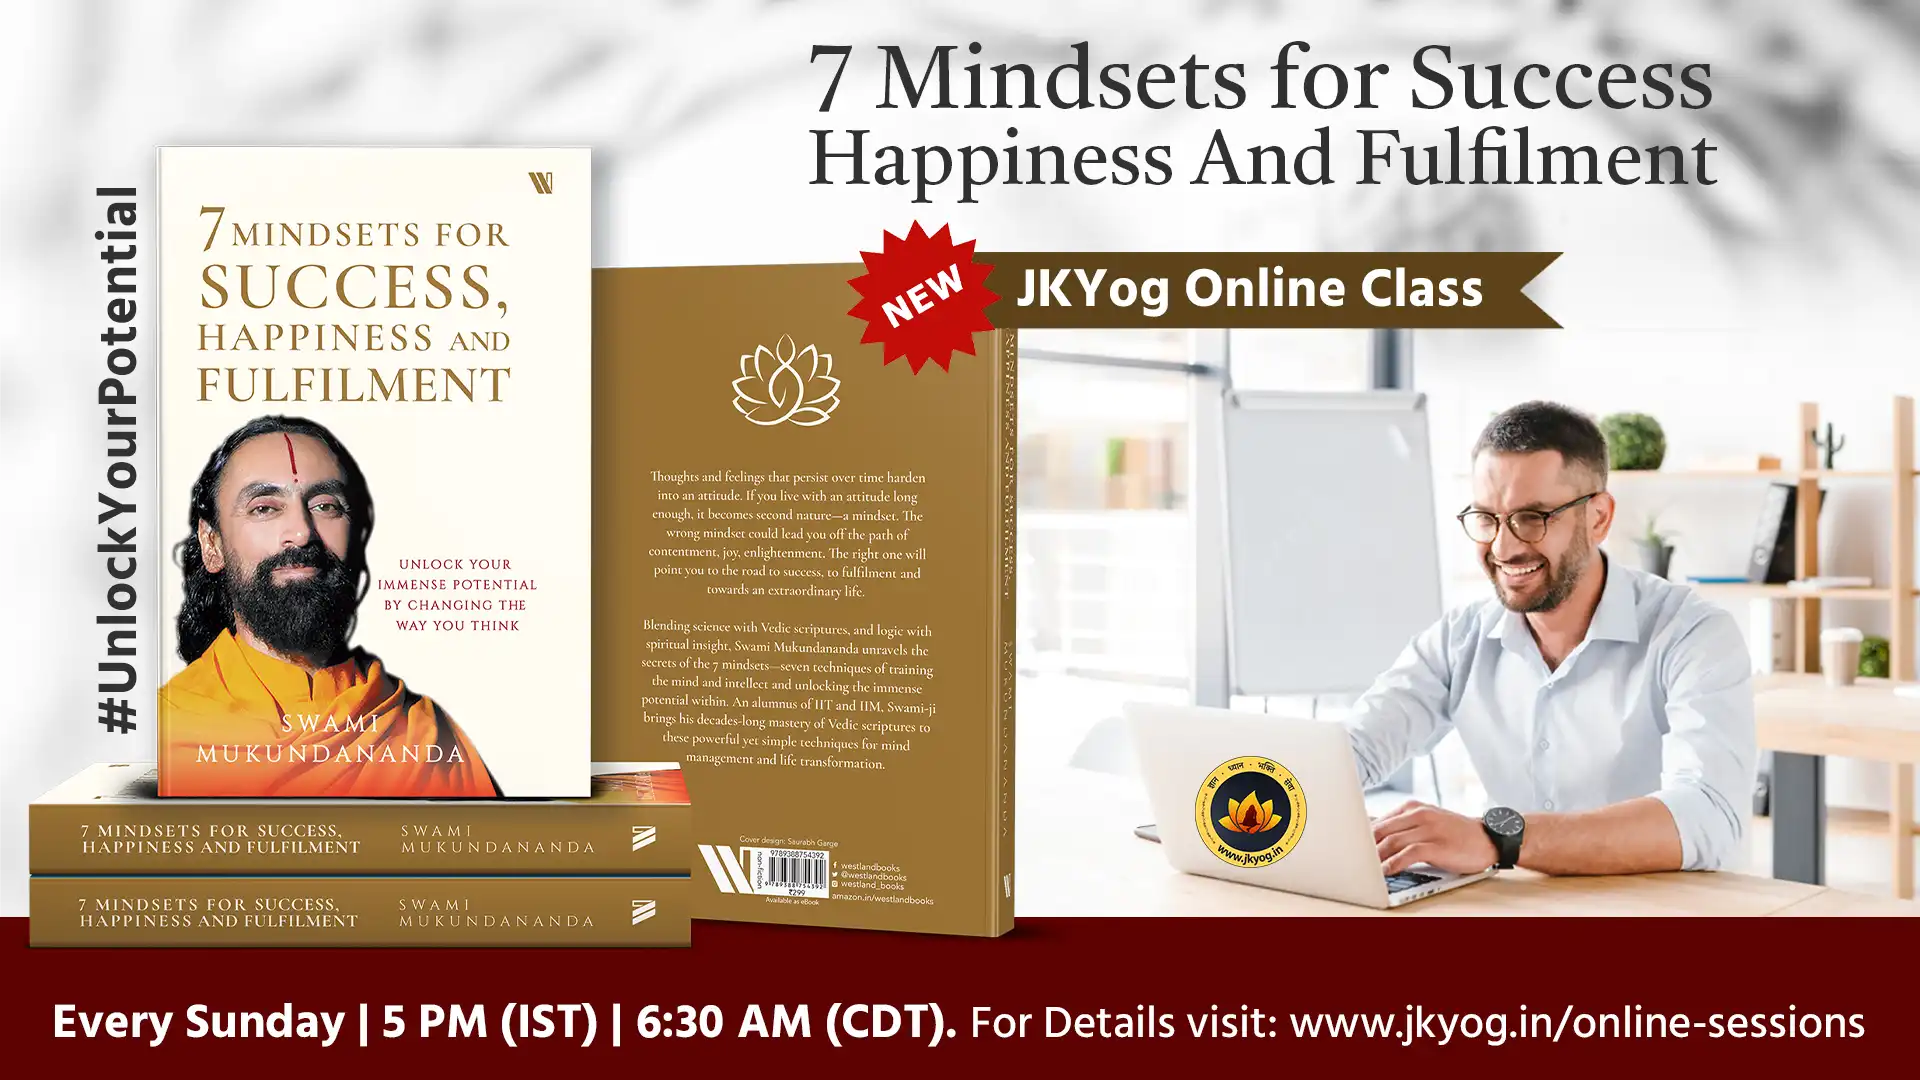 7 Mindsets for Success Happiness and Fulfillment